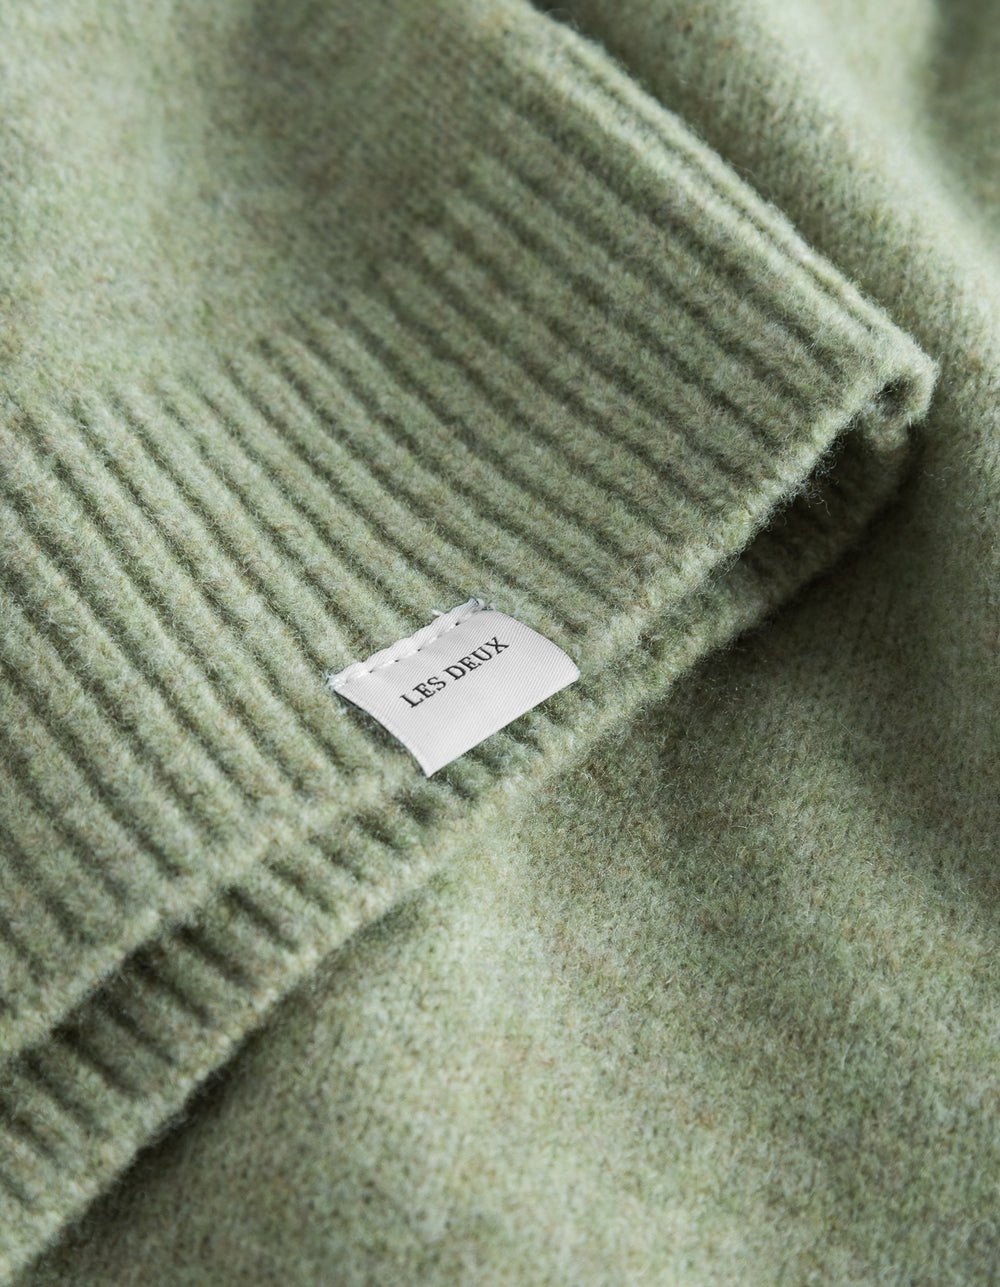 FRANCIS RECYCLED KNIT - NEUTRAL GREEN